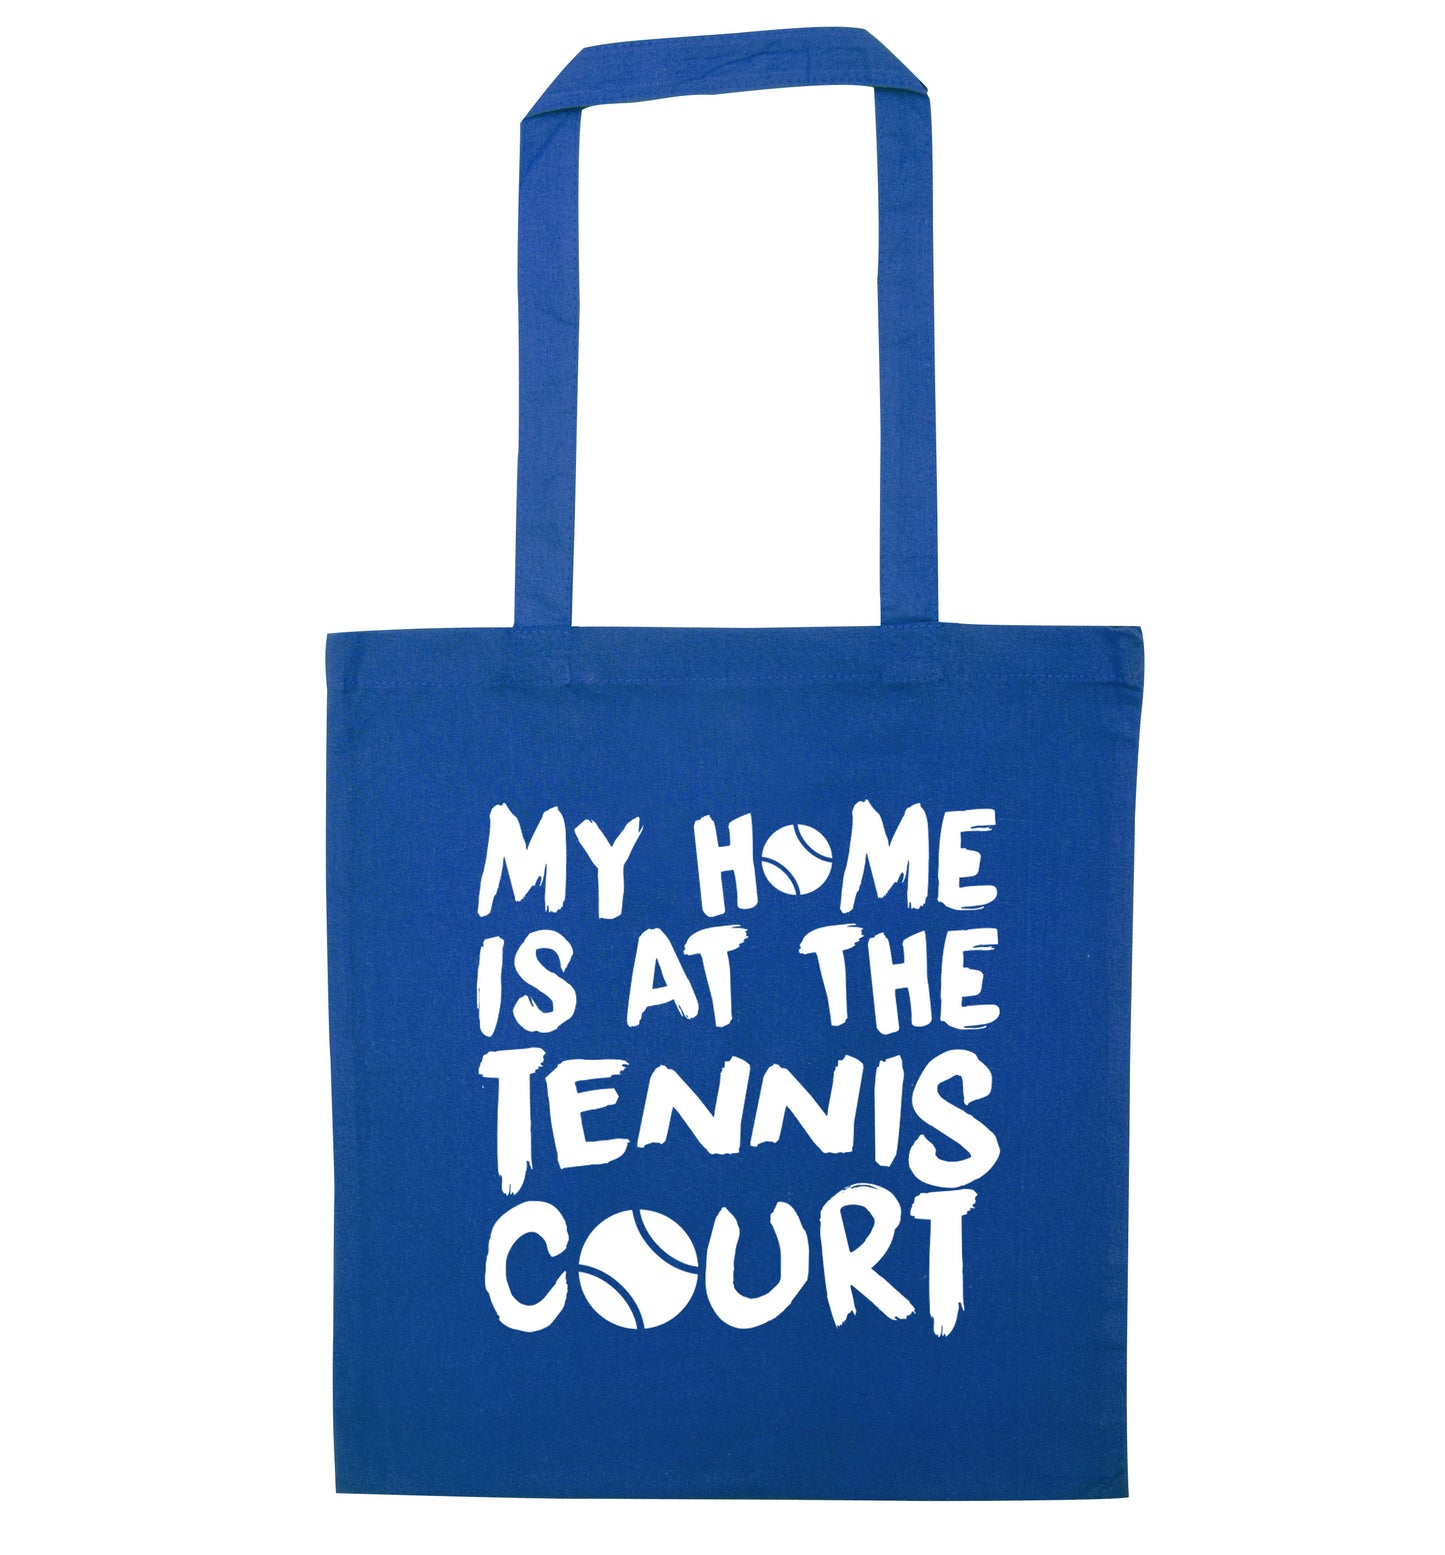 My home is at the tennis court blue tote bag